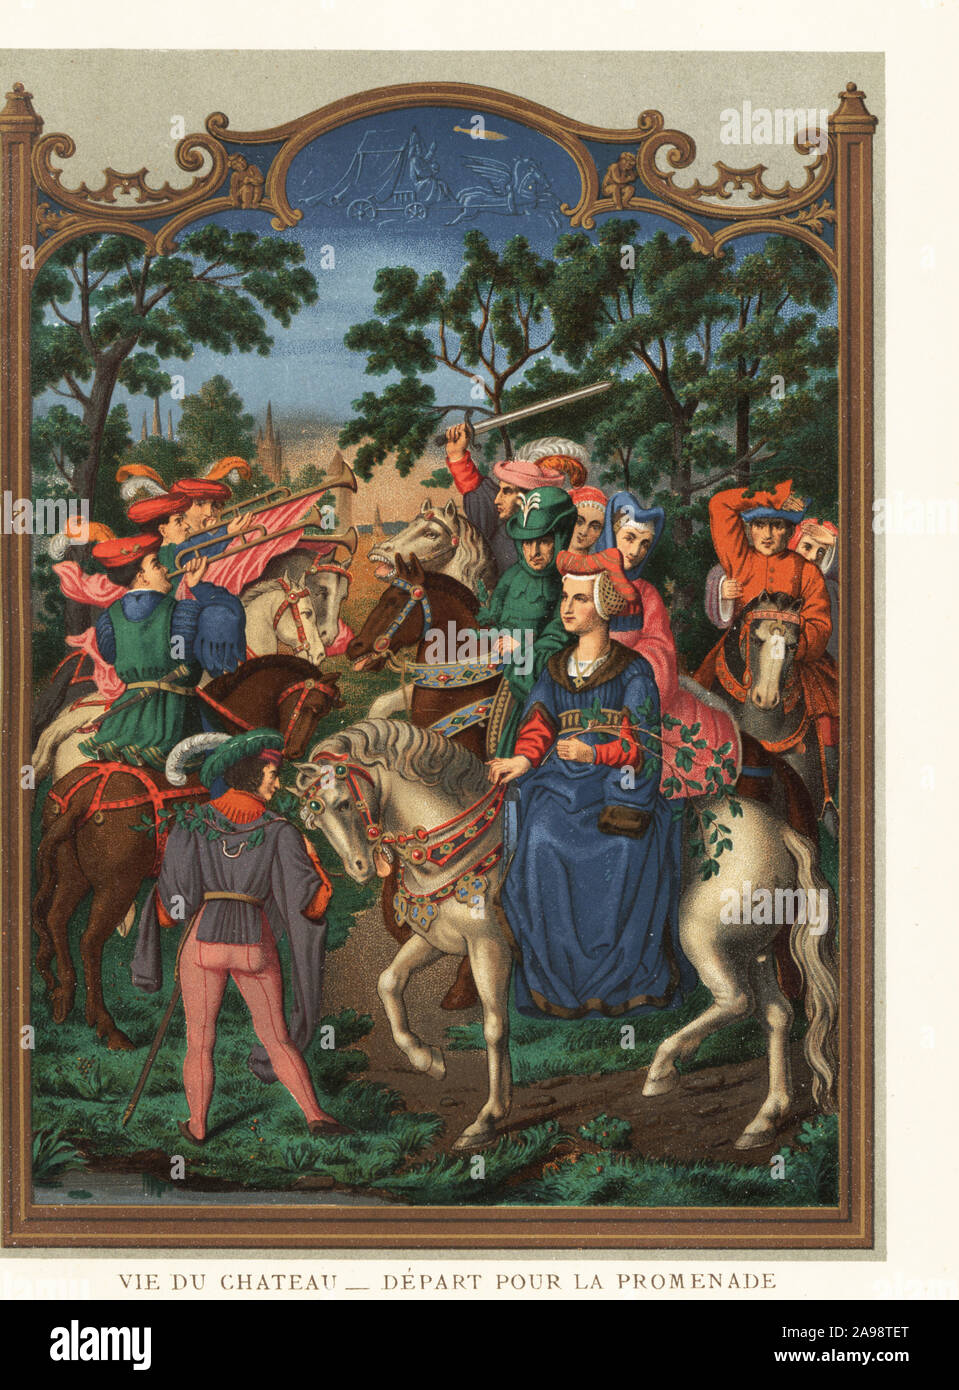 Castle life, 16th century. The chatelaine rides an ambling horse next to the lord dressed all in green. Trumpeters play a march. From the Breviary of Cardinal Domenico Grimani, 1510-1520, attributed to Hans Memling.  Vie du chateau. Depart pour la promenade. Chromolithograph from Paul Lacroix’s La Vie Militaire et Religieuse au Moyen Age et a l’Epoque de la Renaissance, Military and Religious Life in the Middle Ages and the Renaissance, Paris, 1873. Stock Photo